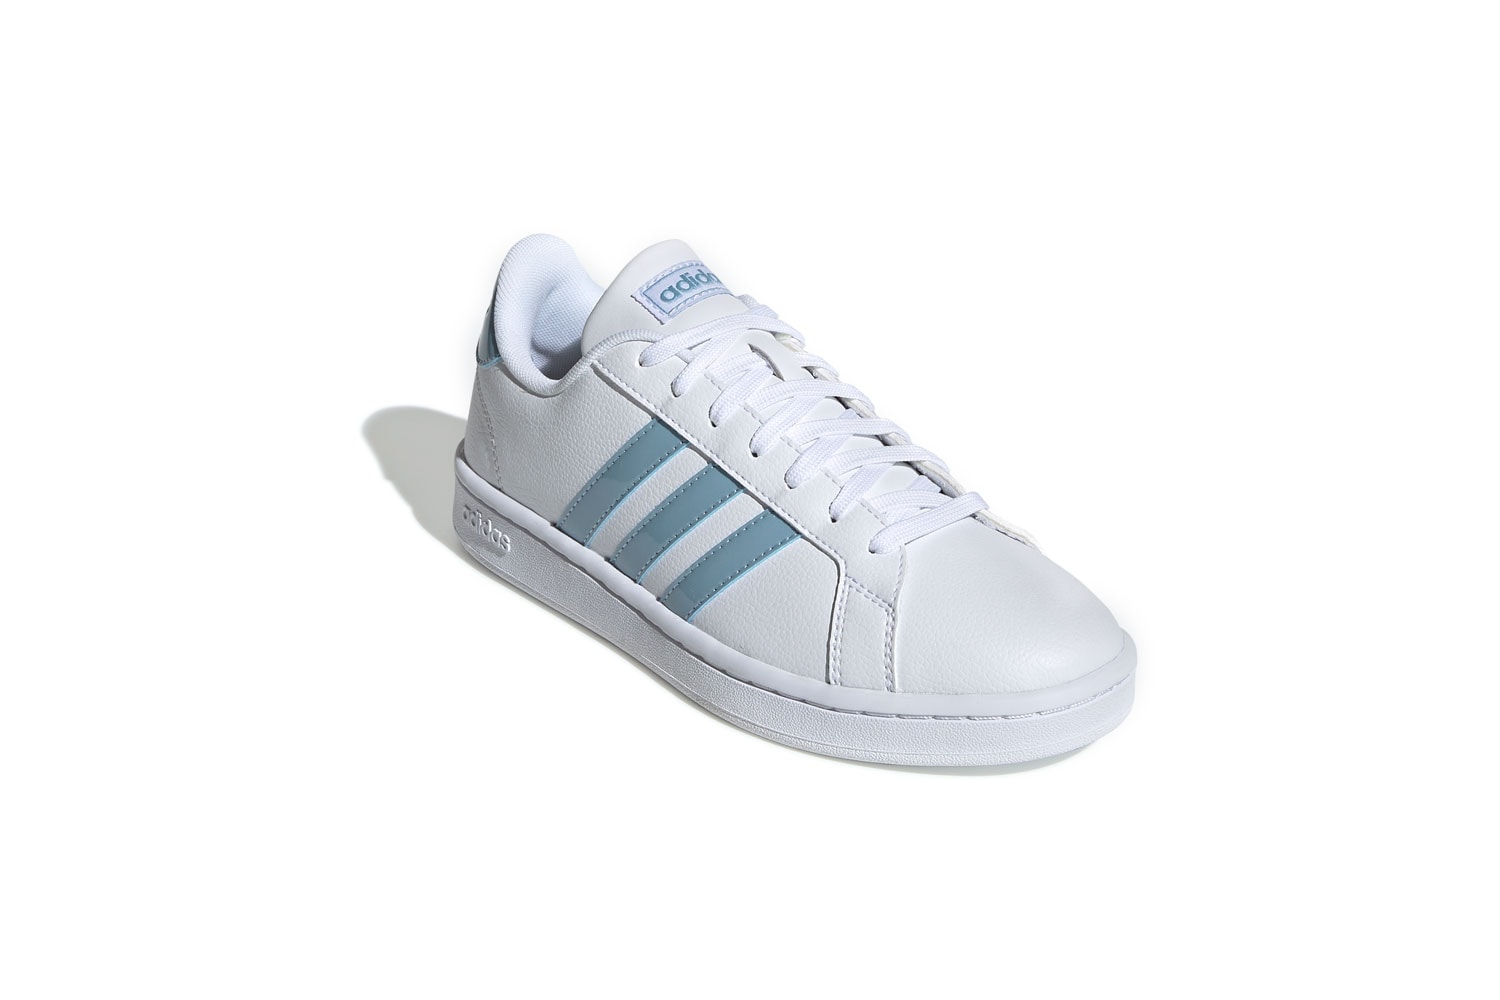 adidas grand court shoes blue sneakers three stripes footwear drop release new 